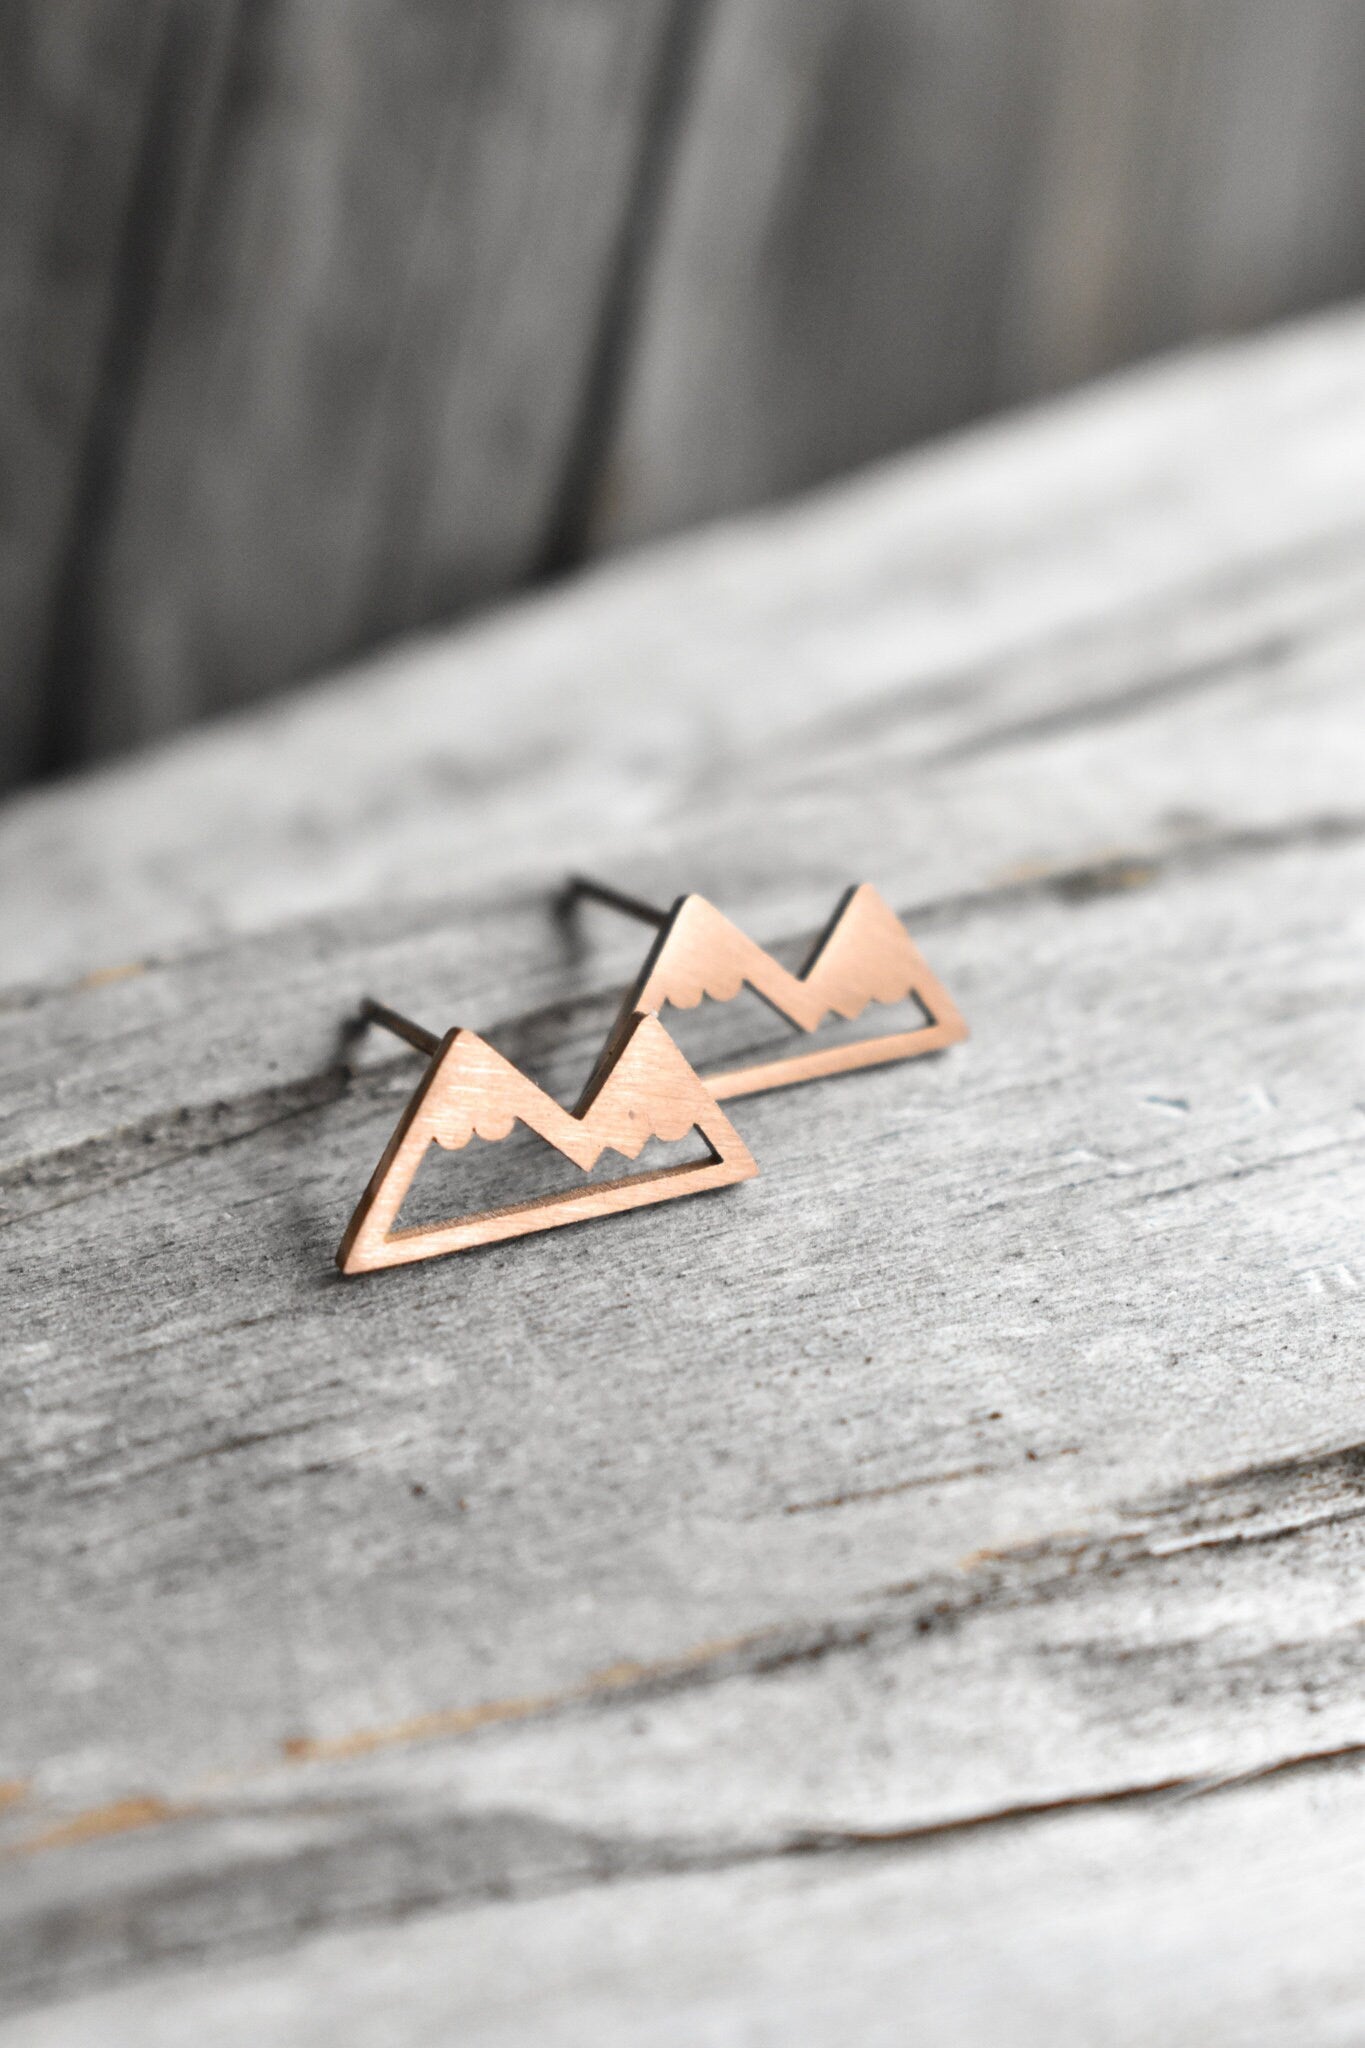 Mountain Stud Earrings, Mountain Top Wedding Ceremony Jewelry for Bride or Bridesmaids, Rose Gold Mountain Peak Earrings, Gift for Climbers